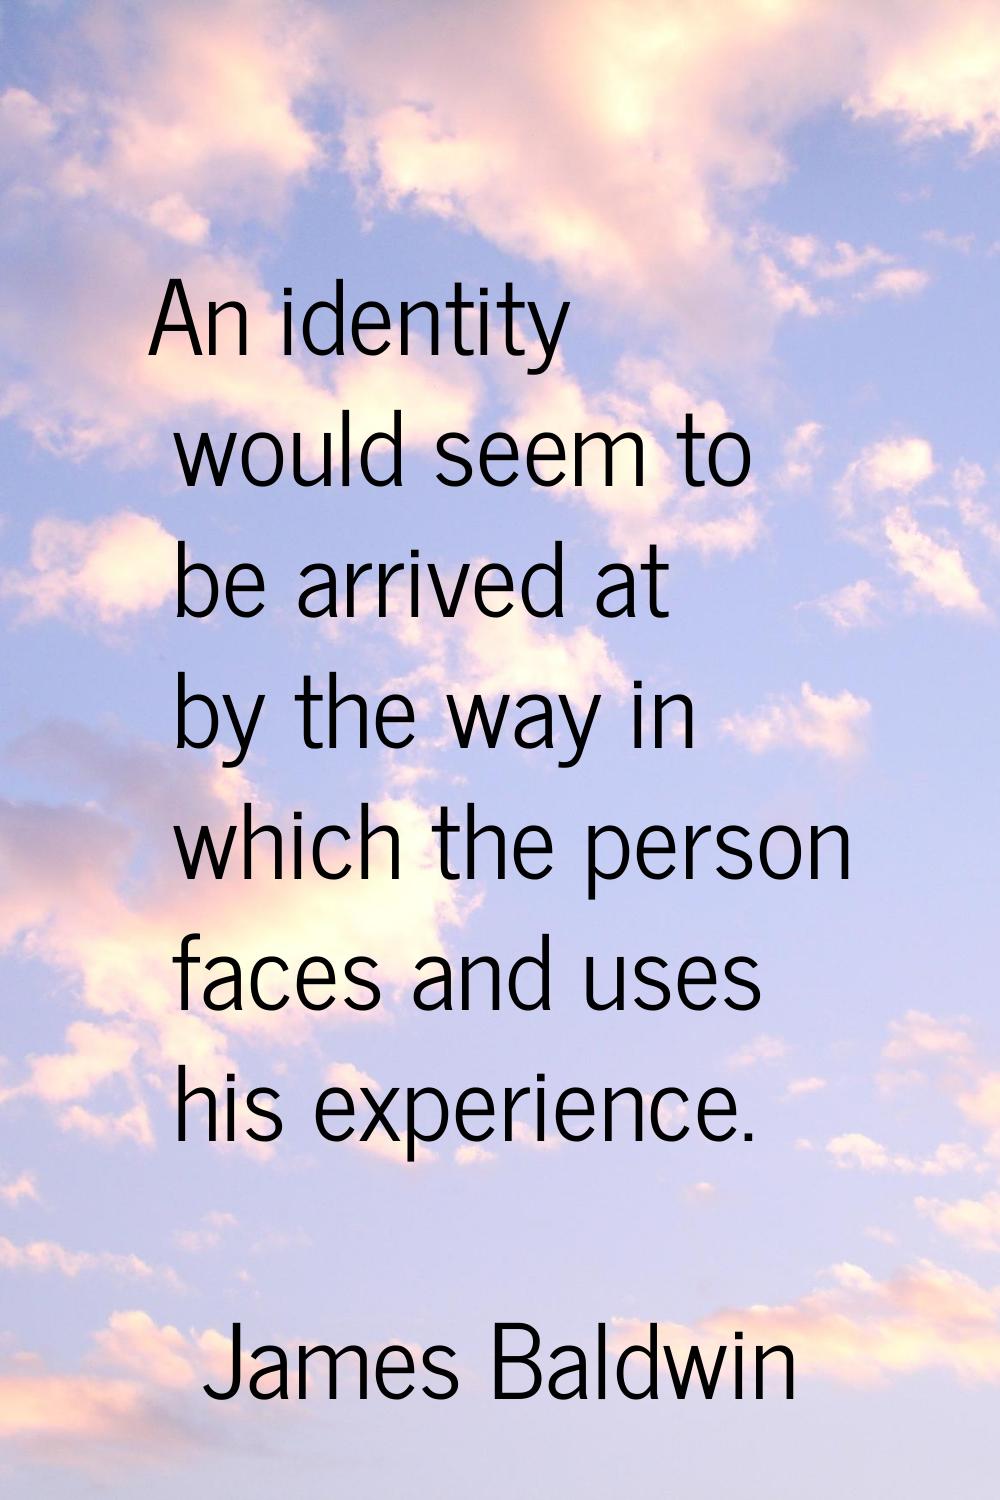 An identity would seem to be arrived at by the way in which the person faces and uses his experienc